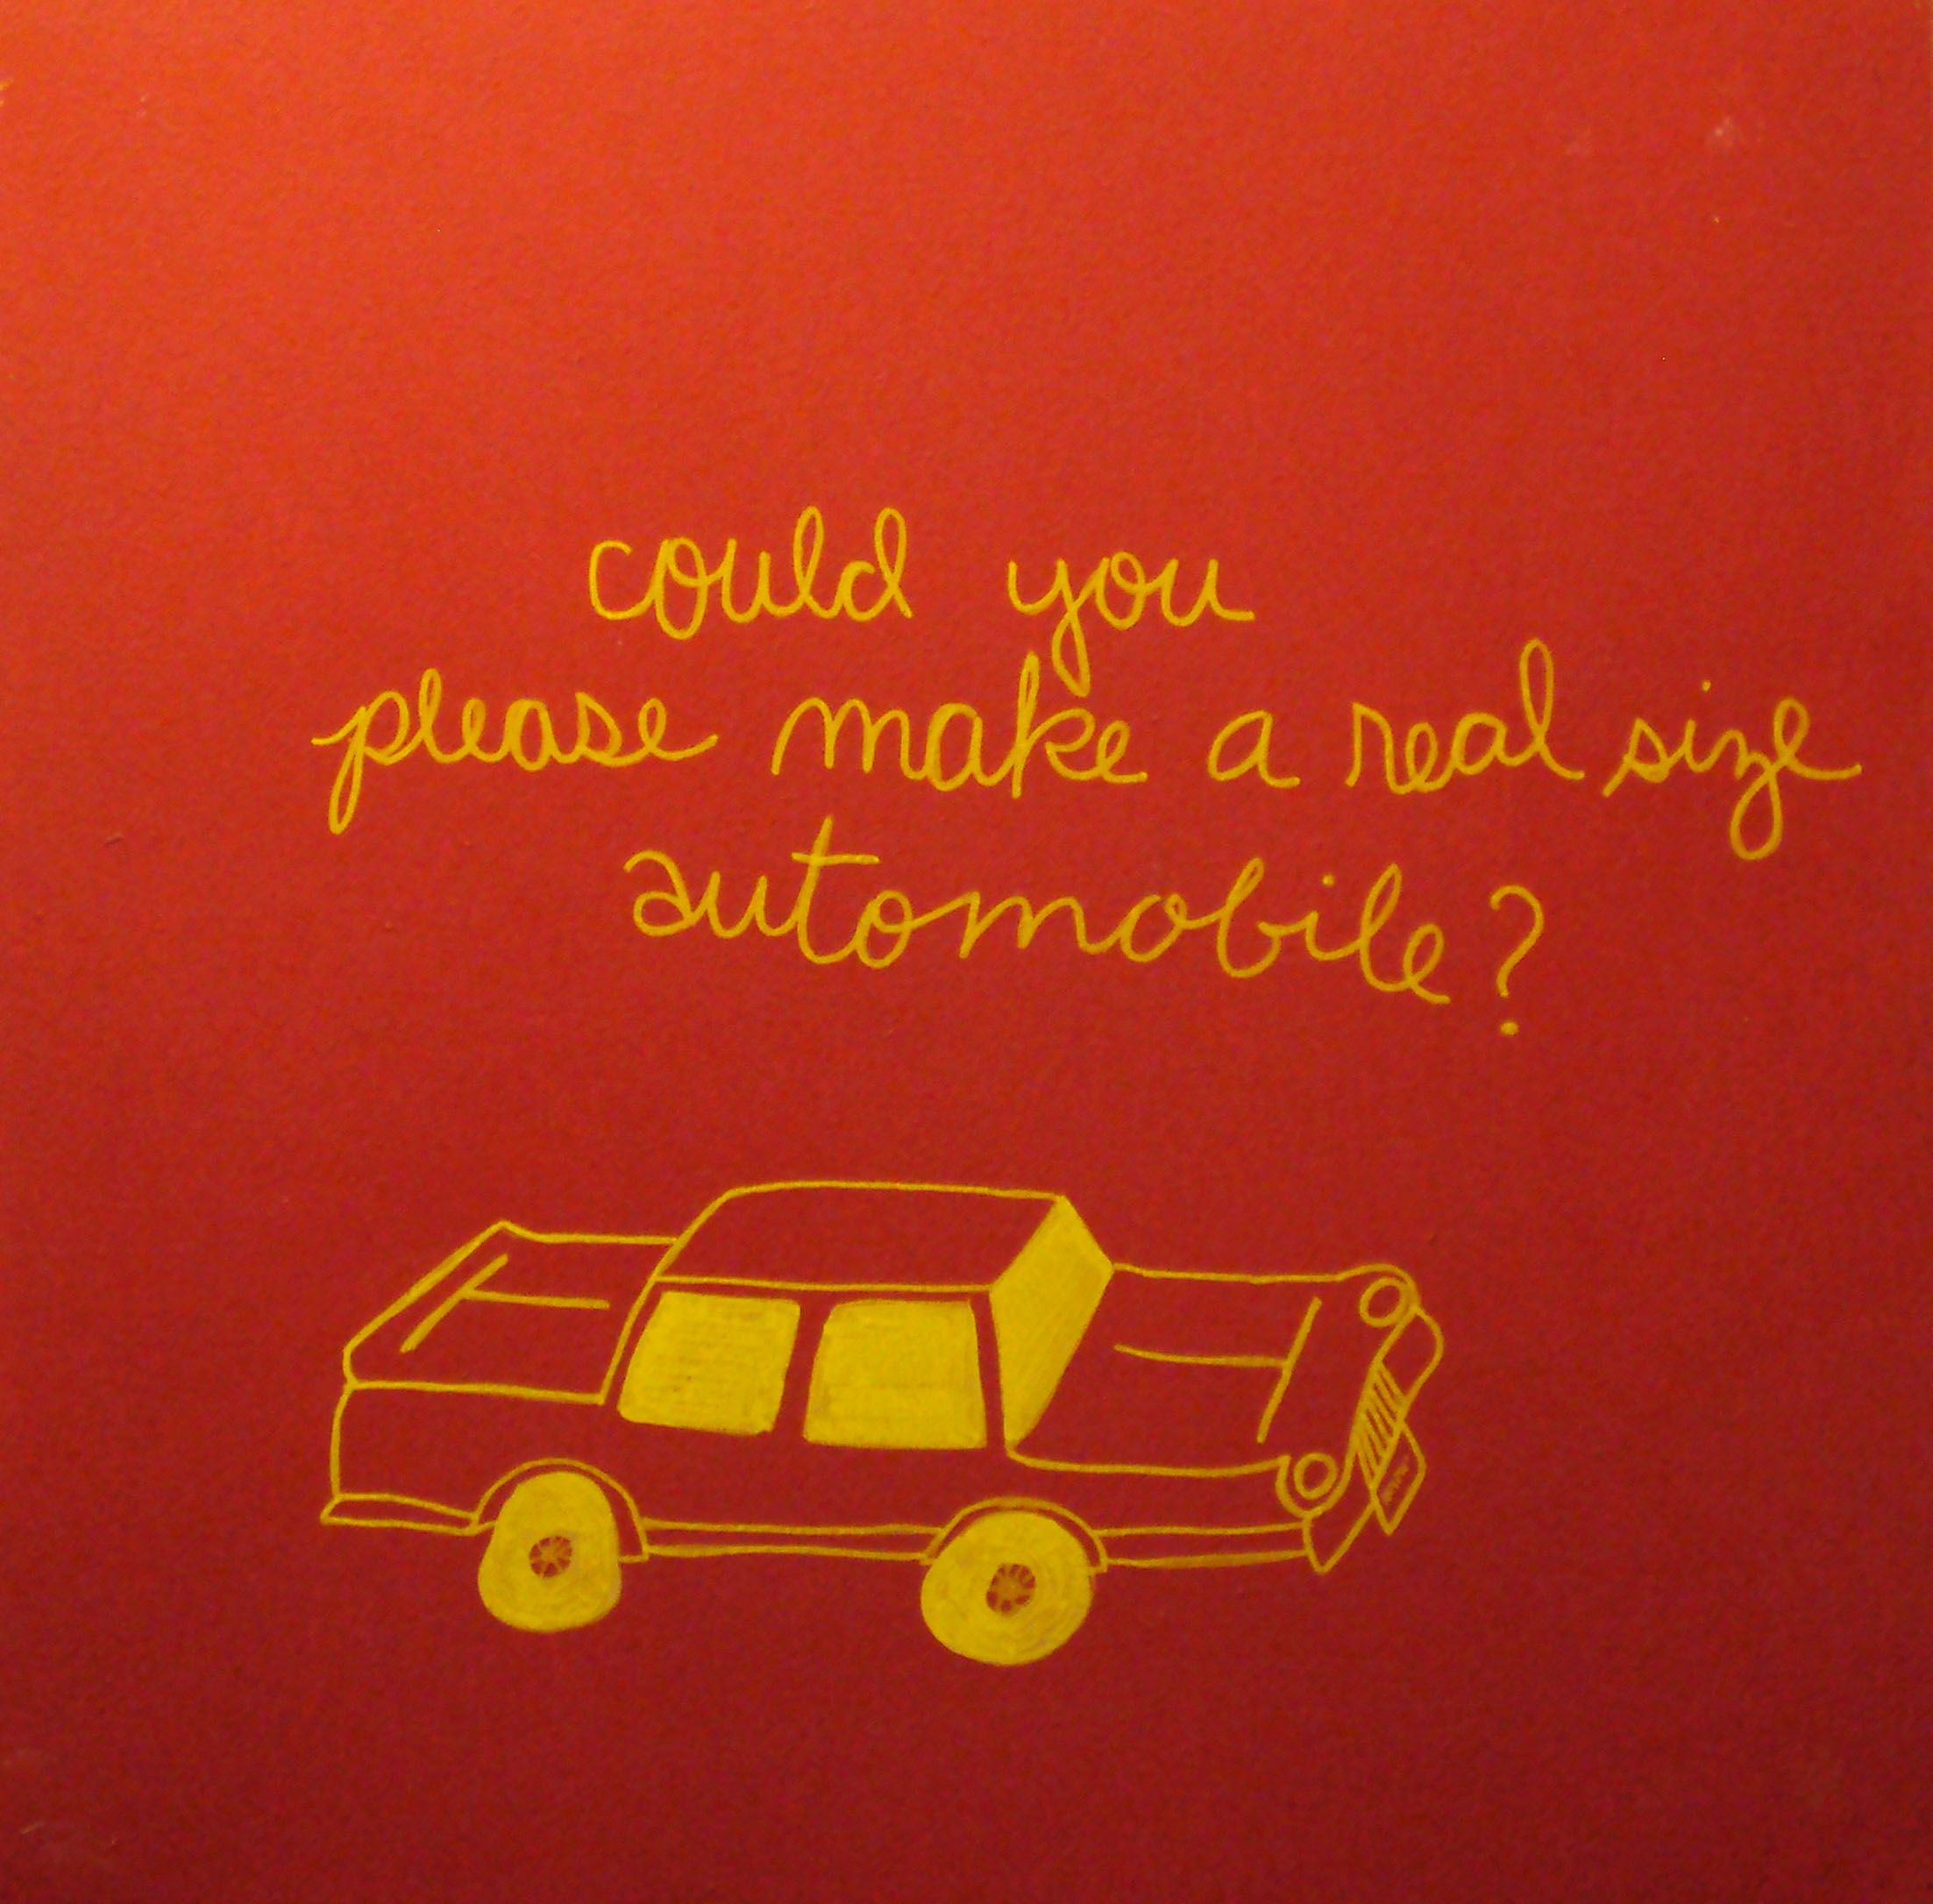   could you please make a real size automobile?  acrylic on wood panel 24” x 24” 2002 